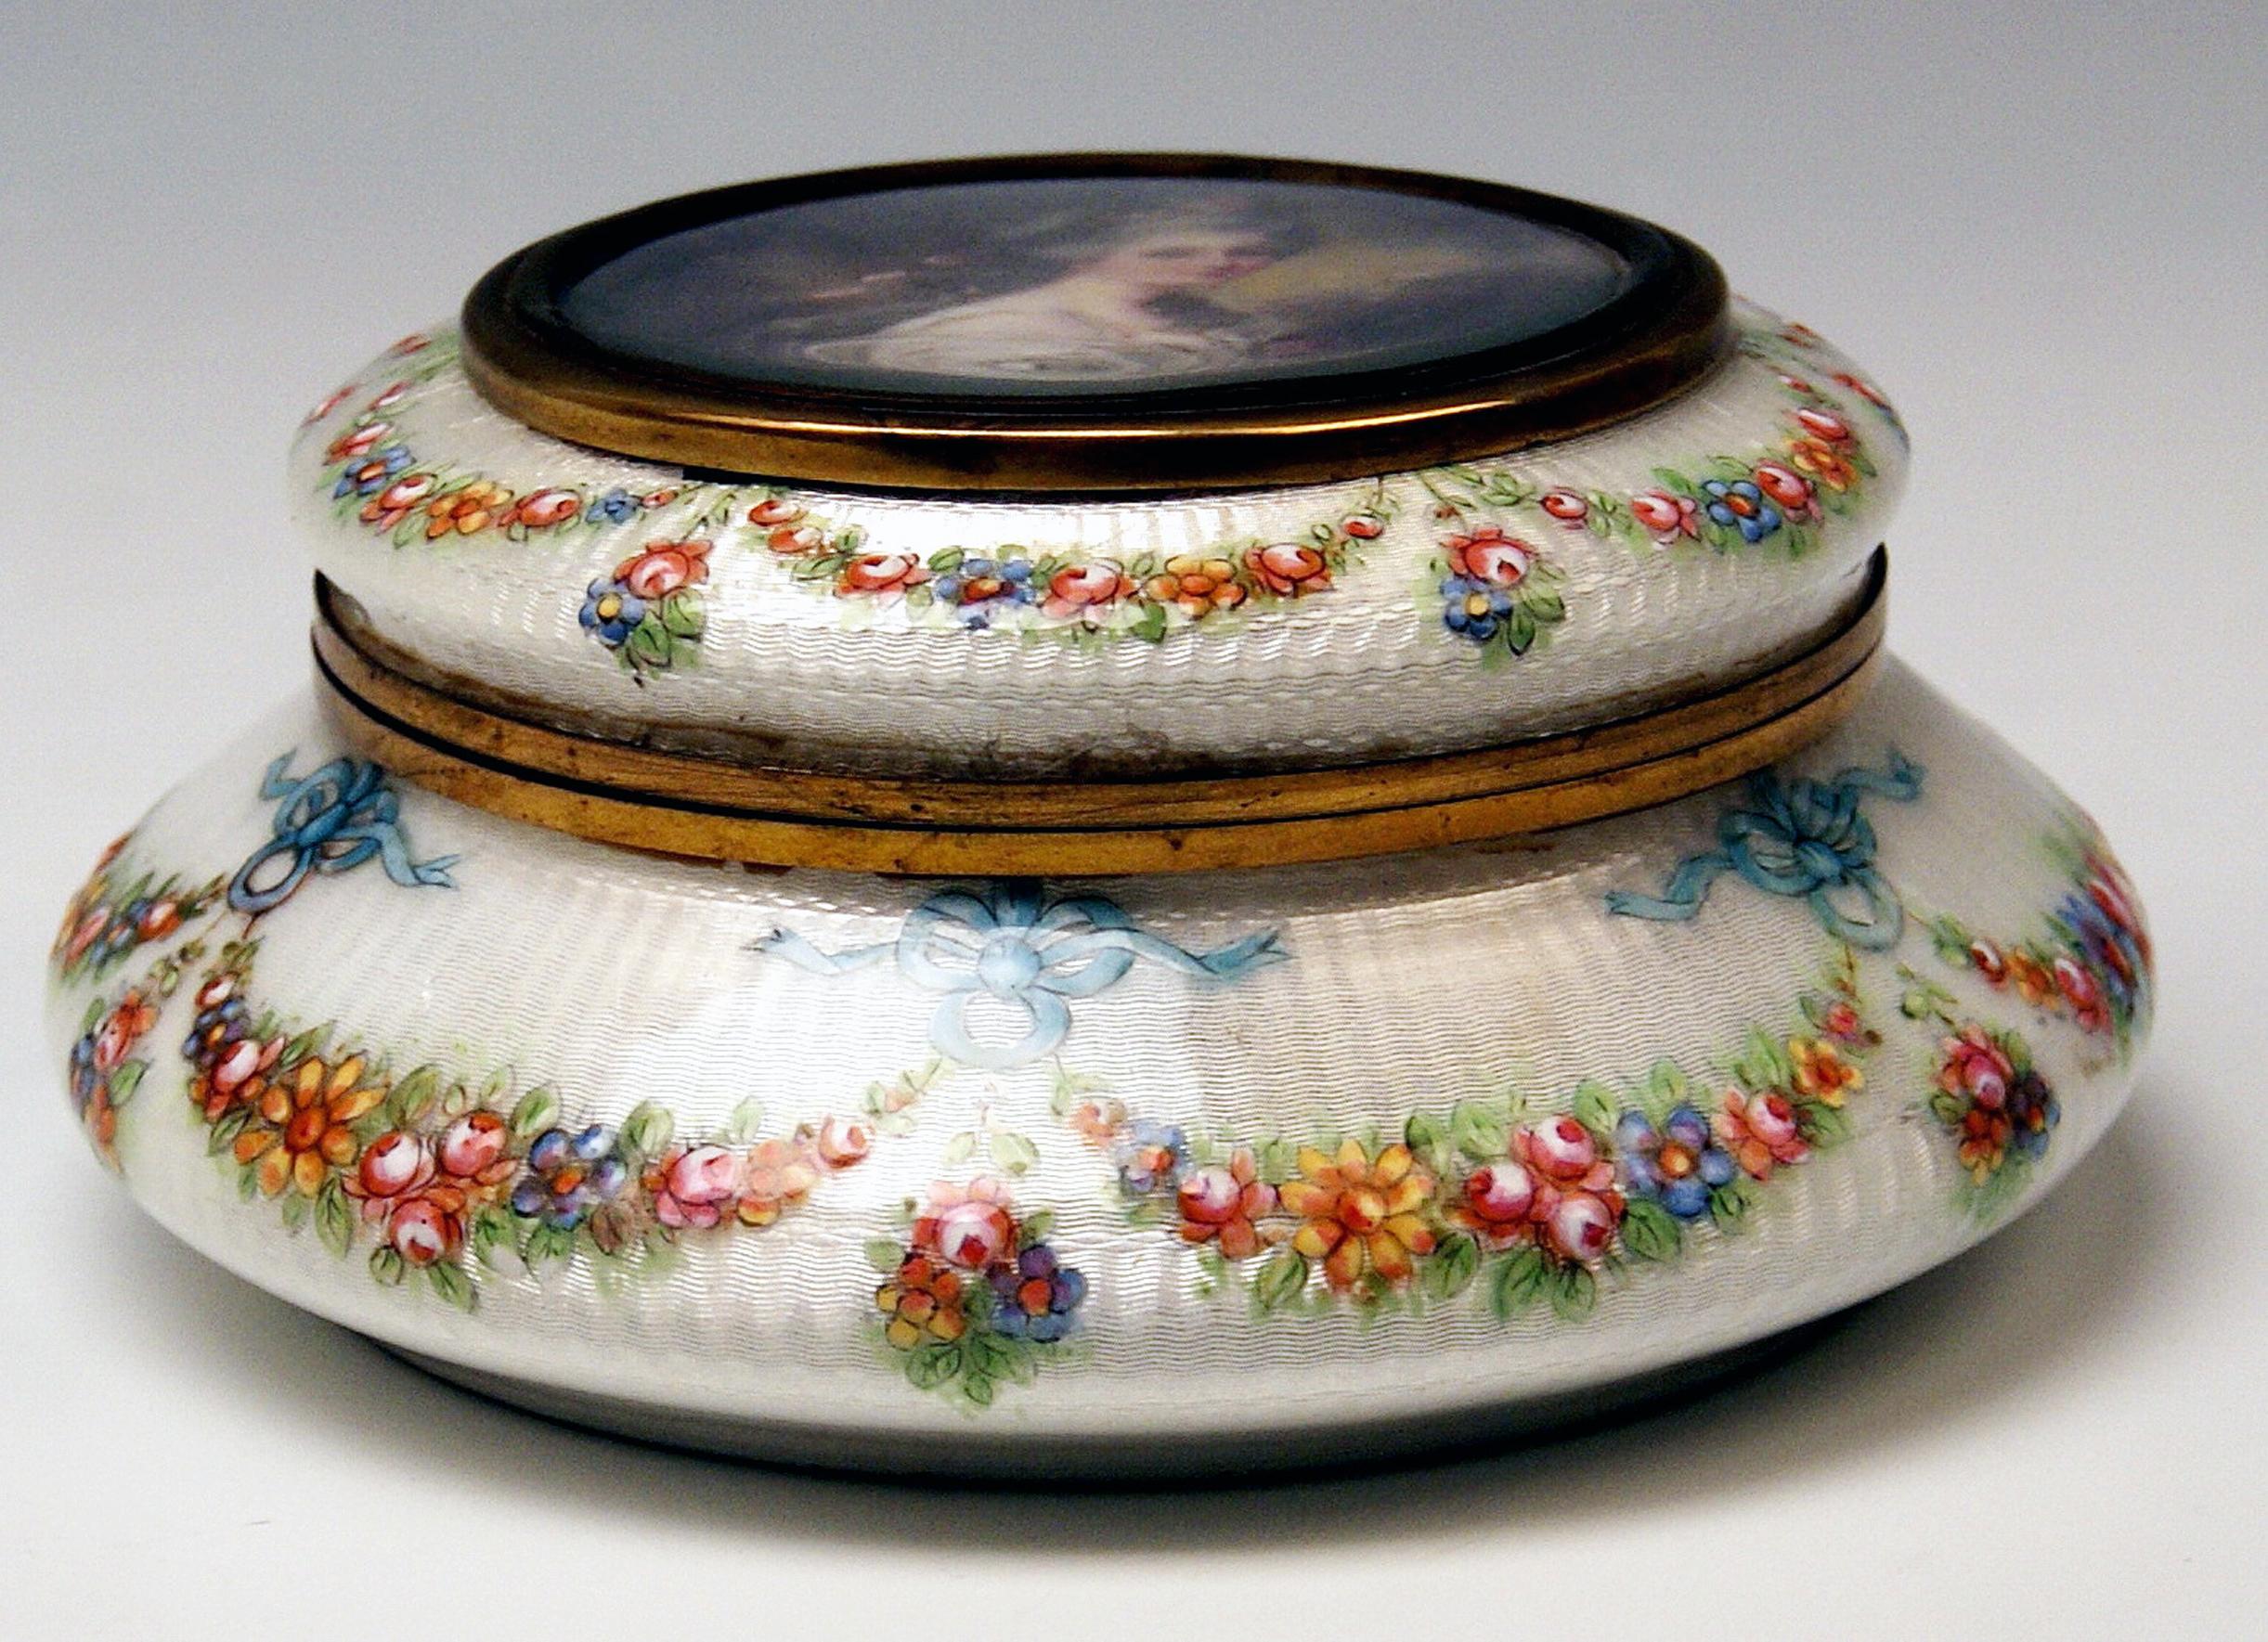 Superb enamel box with flowers garlands and a lady's portrait.

Specifications:
1. The surface of round box is made of white enamel. Additionally, it is stunningly decorated with nicest multicolored flowers' garlands running along the surface /